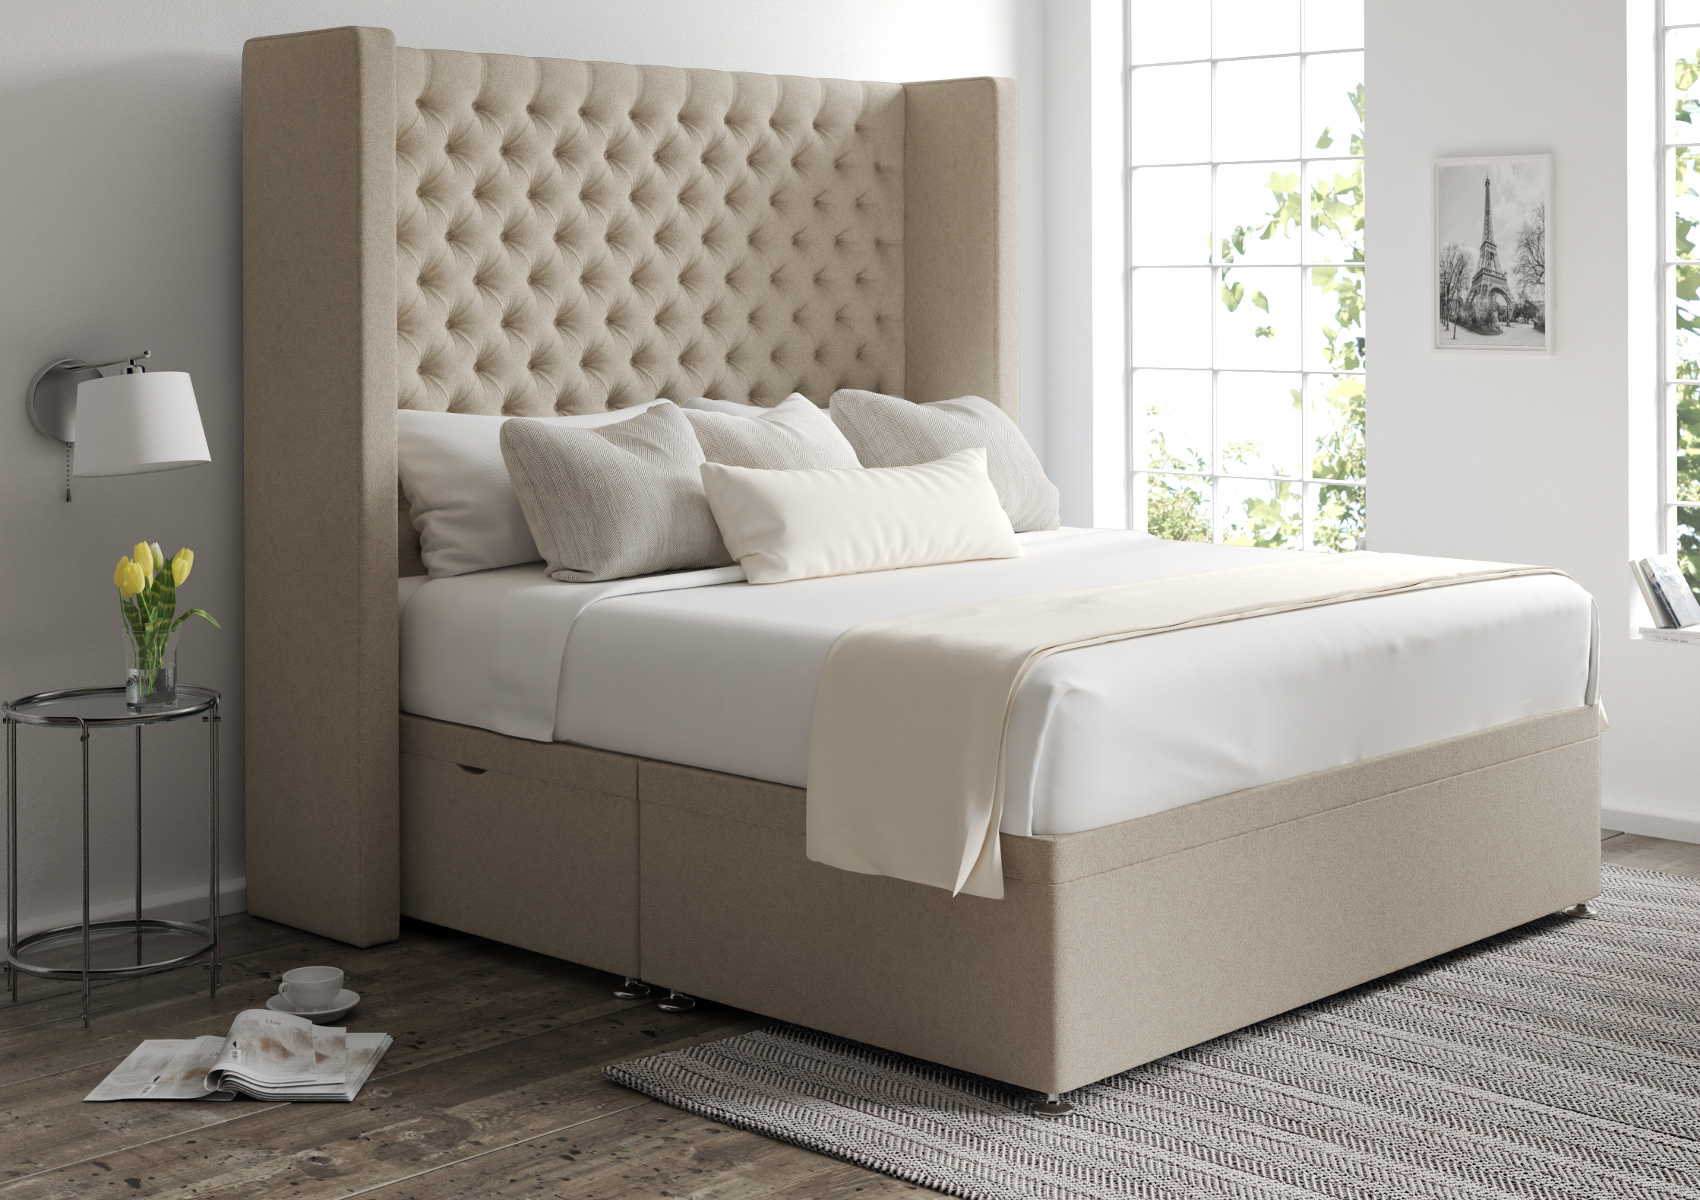 View Emma Arran Cyan Upholstered Double Ottoman Bed Time4Sleep information